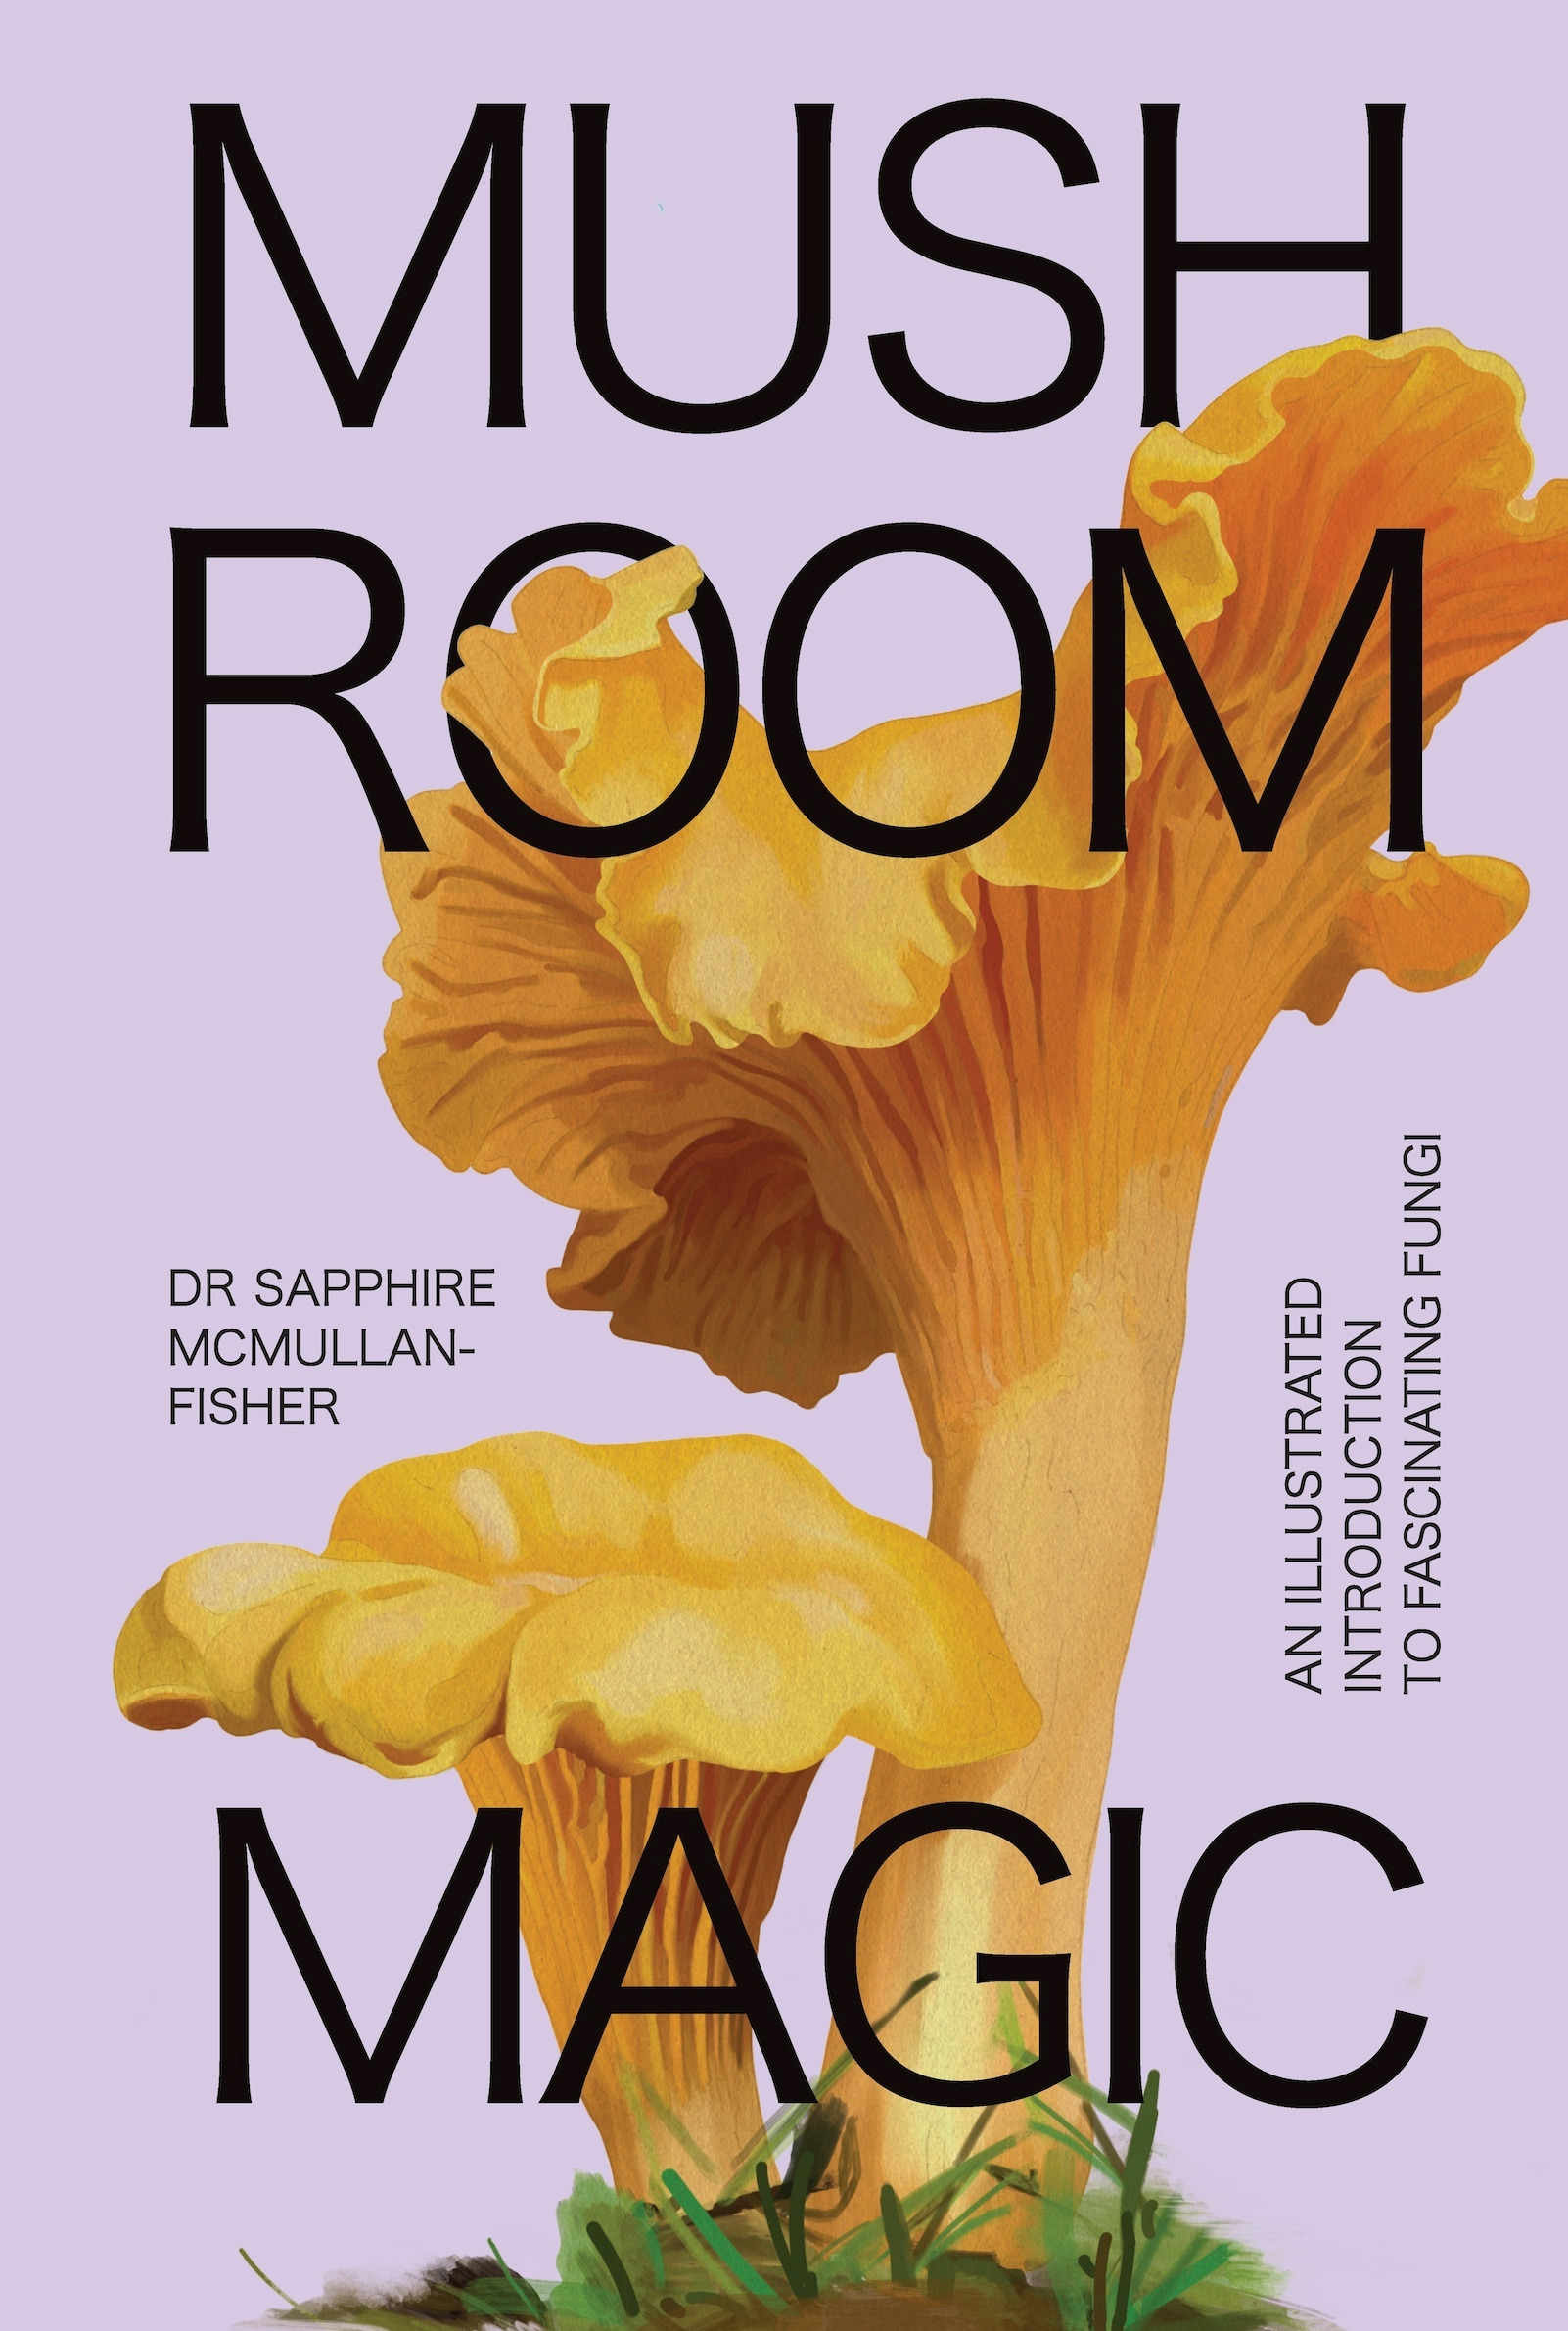 MUSHROOM MAGIC: AN ILLUSTRATED INTRODUCTION TO FASCINATING FUNGI, by MCMULLAN-FISHER, SAPPHIRE